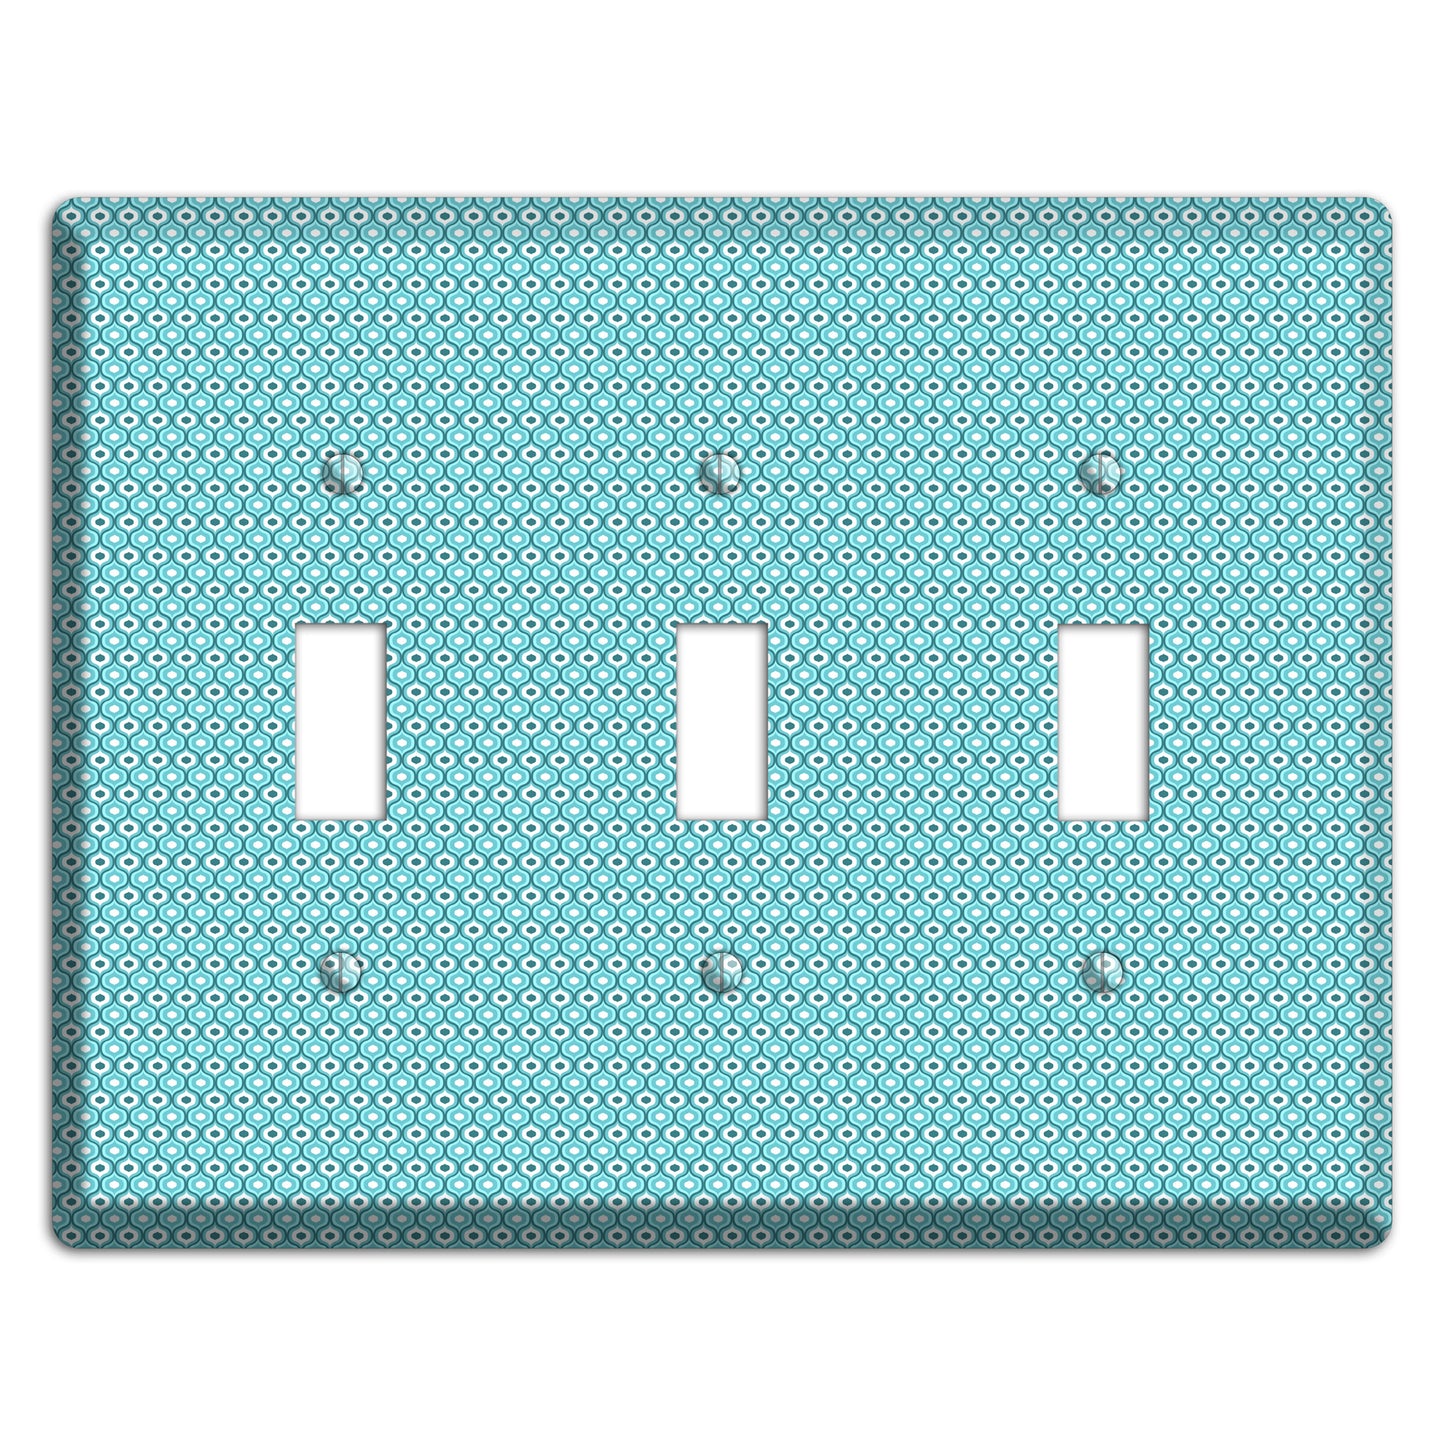 Turquoise Tiny Double Scallop 3 Toggle Wallplate